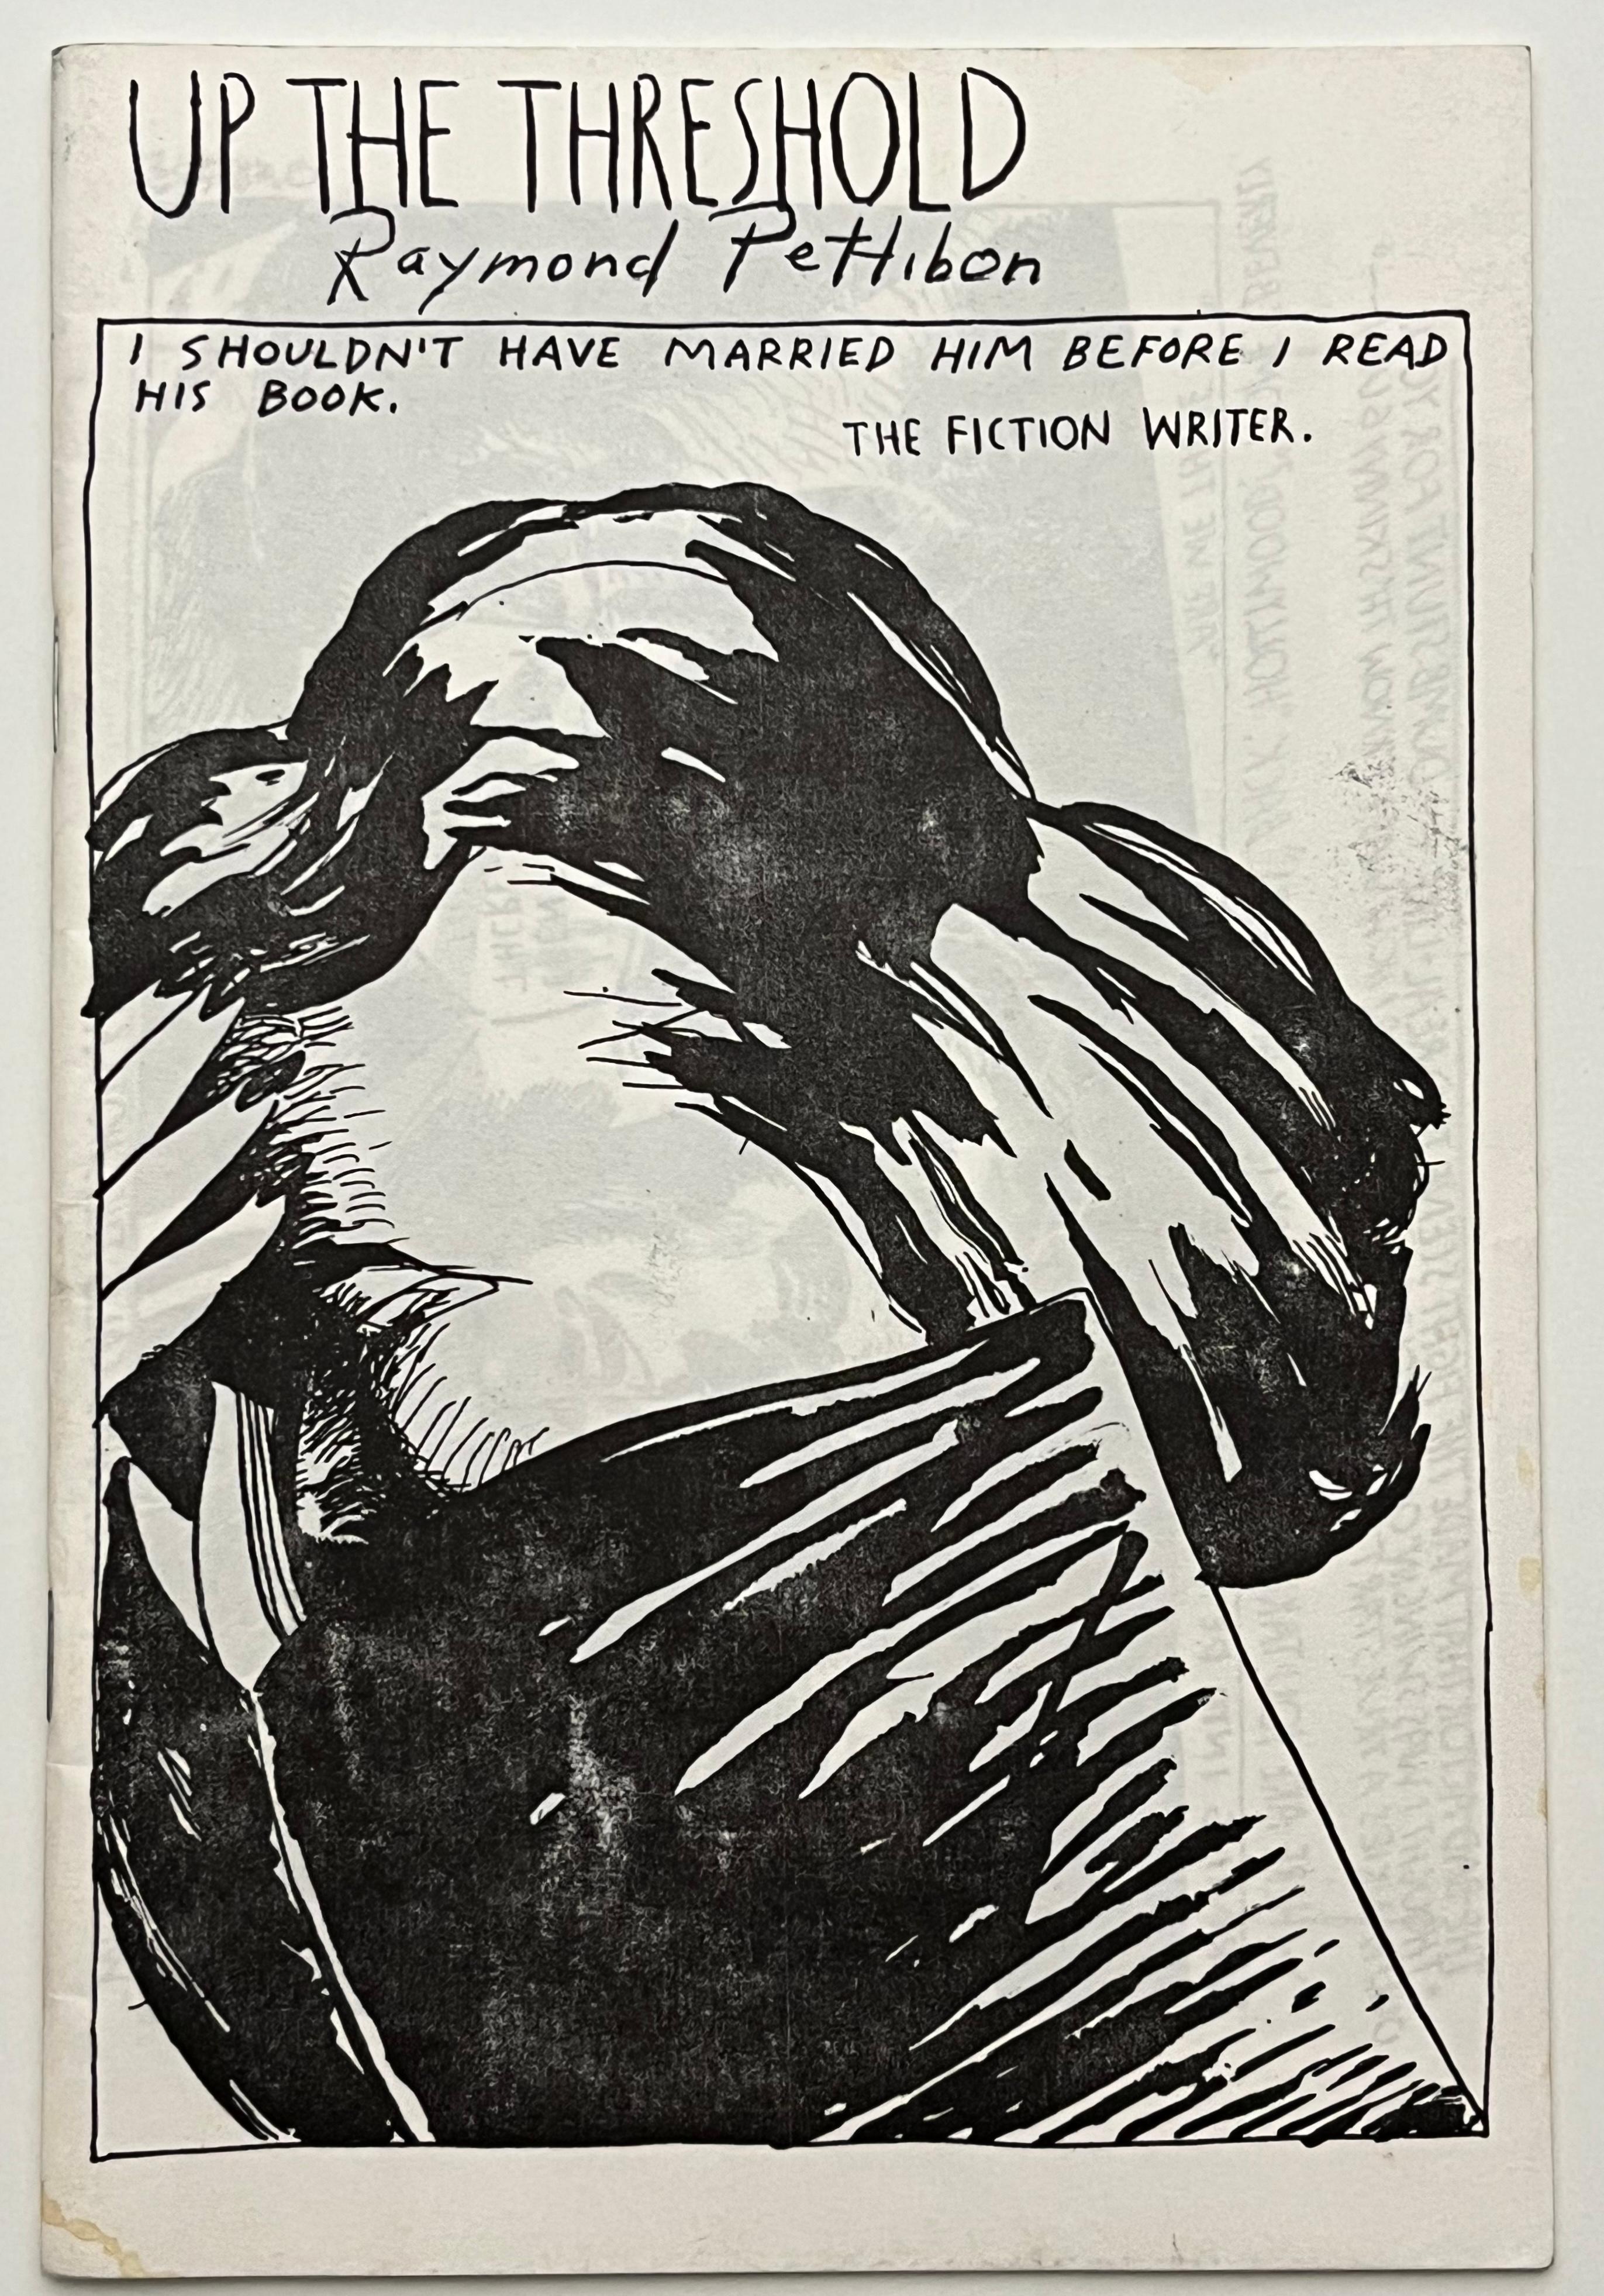 Raymond Pettibon Up The Threshold 1992 (Raymond Pettibon zine):
This visually enticing 1992 Raymond Pettibon artist book/zine includes 20+ evocative drawings. Pettibon’s subjects are the stars of old films, dominatrices, and lovers in thigh-high